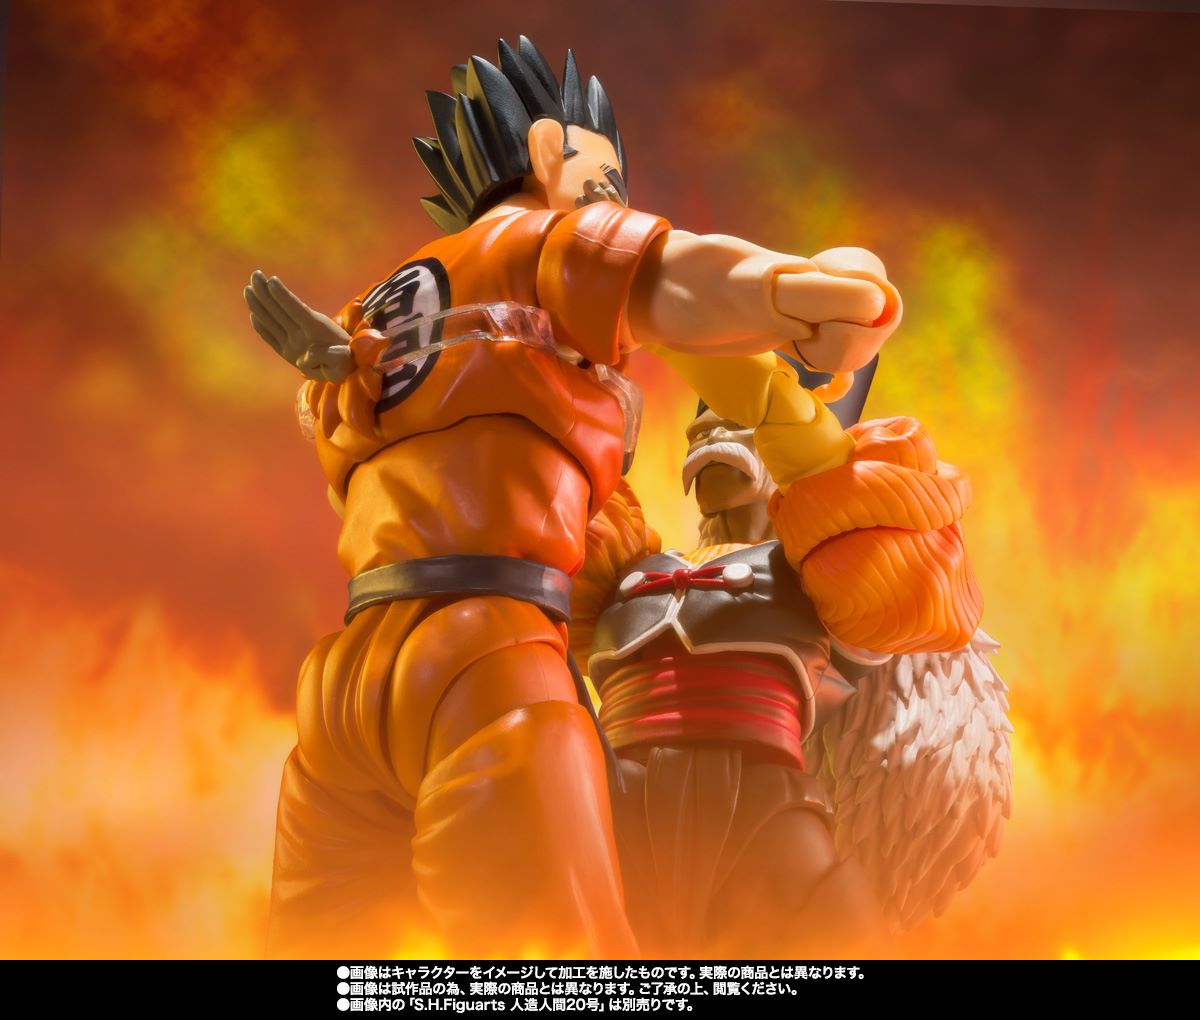 S.H. Figuarts Yamcha (Earth's Foremost Fighter) - P-Bandai